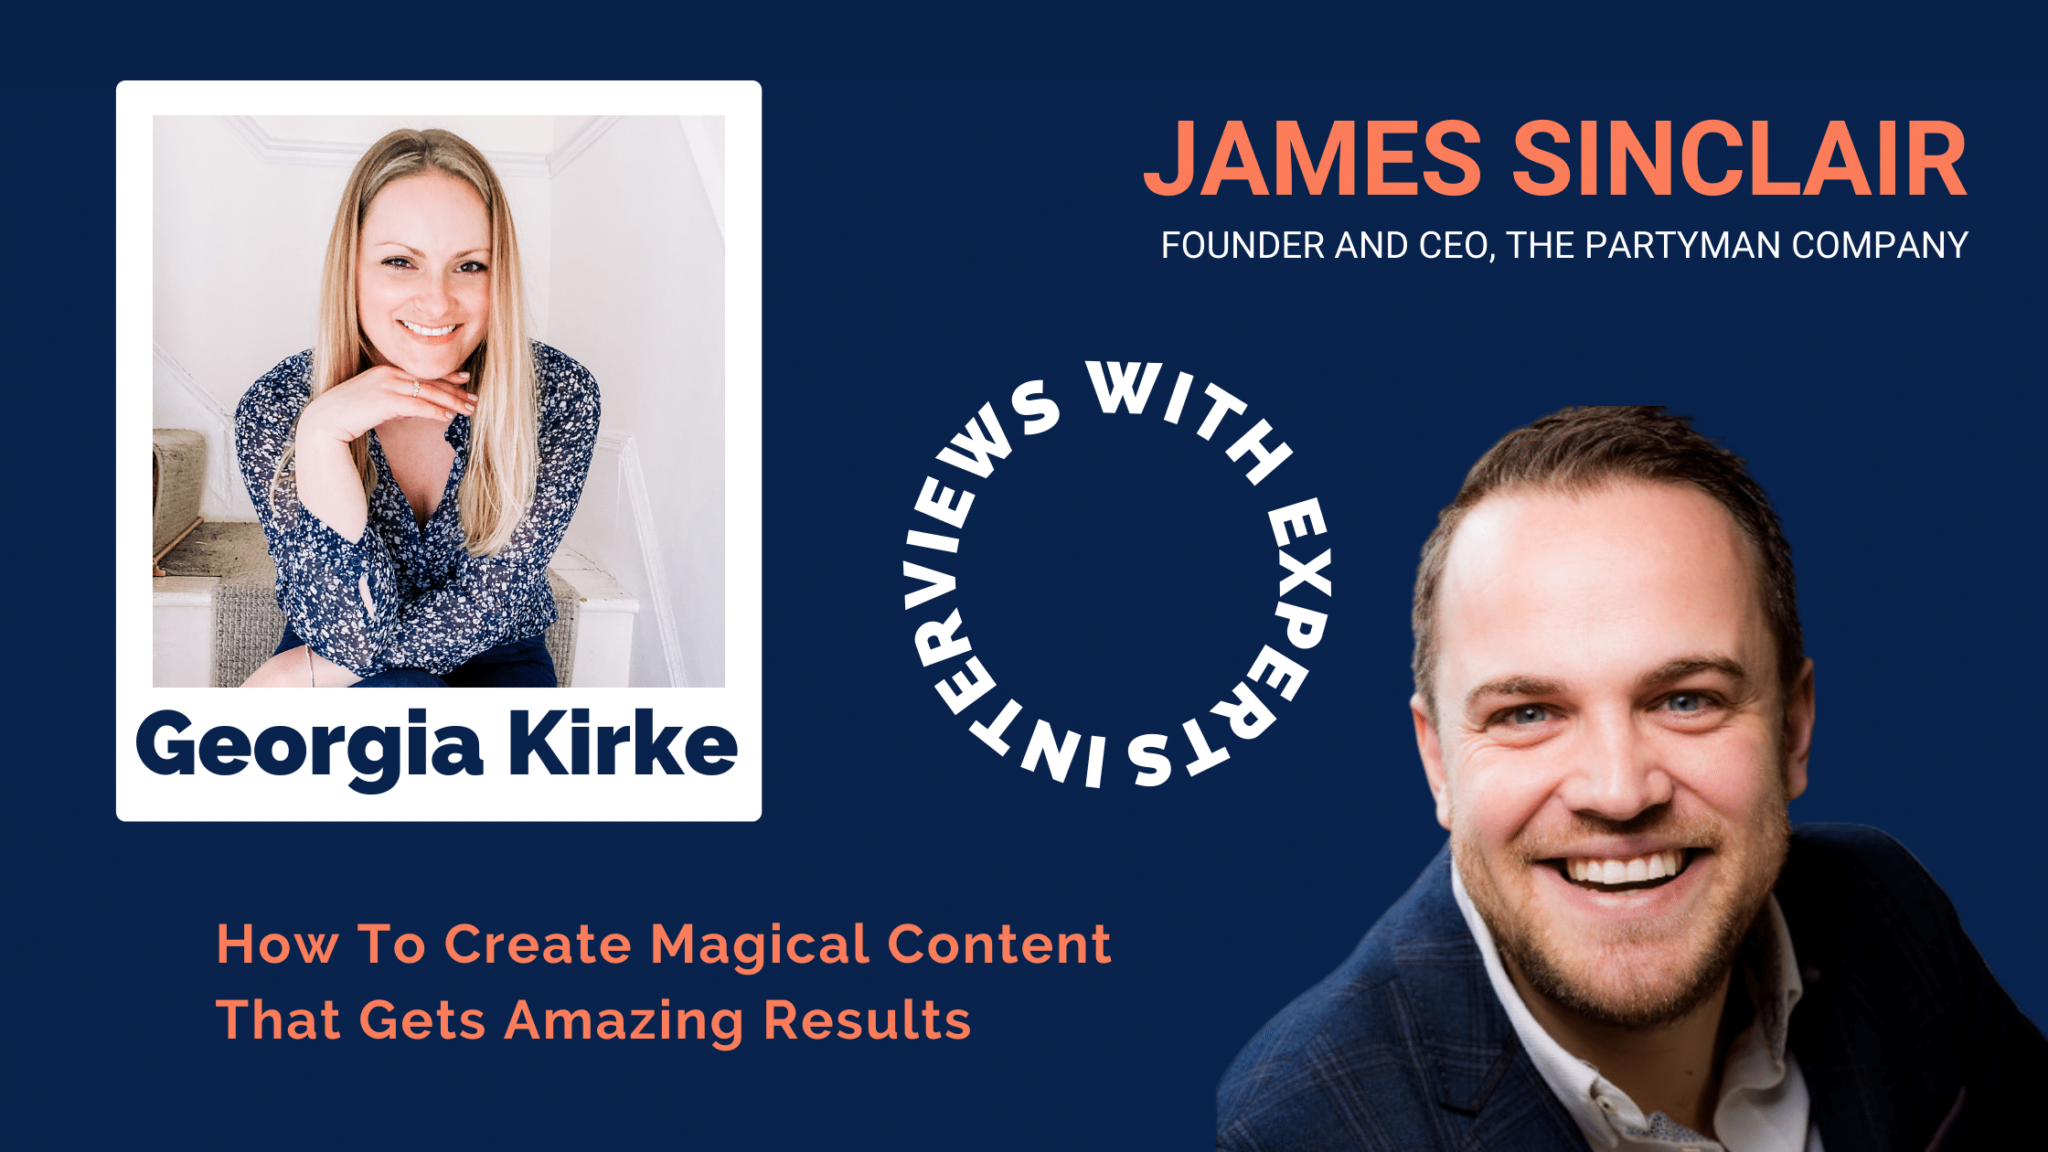 How To Create Magical Content That Gets Amazing Results With Georgia Kirke, and special guest James Sinclair